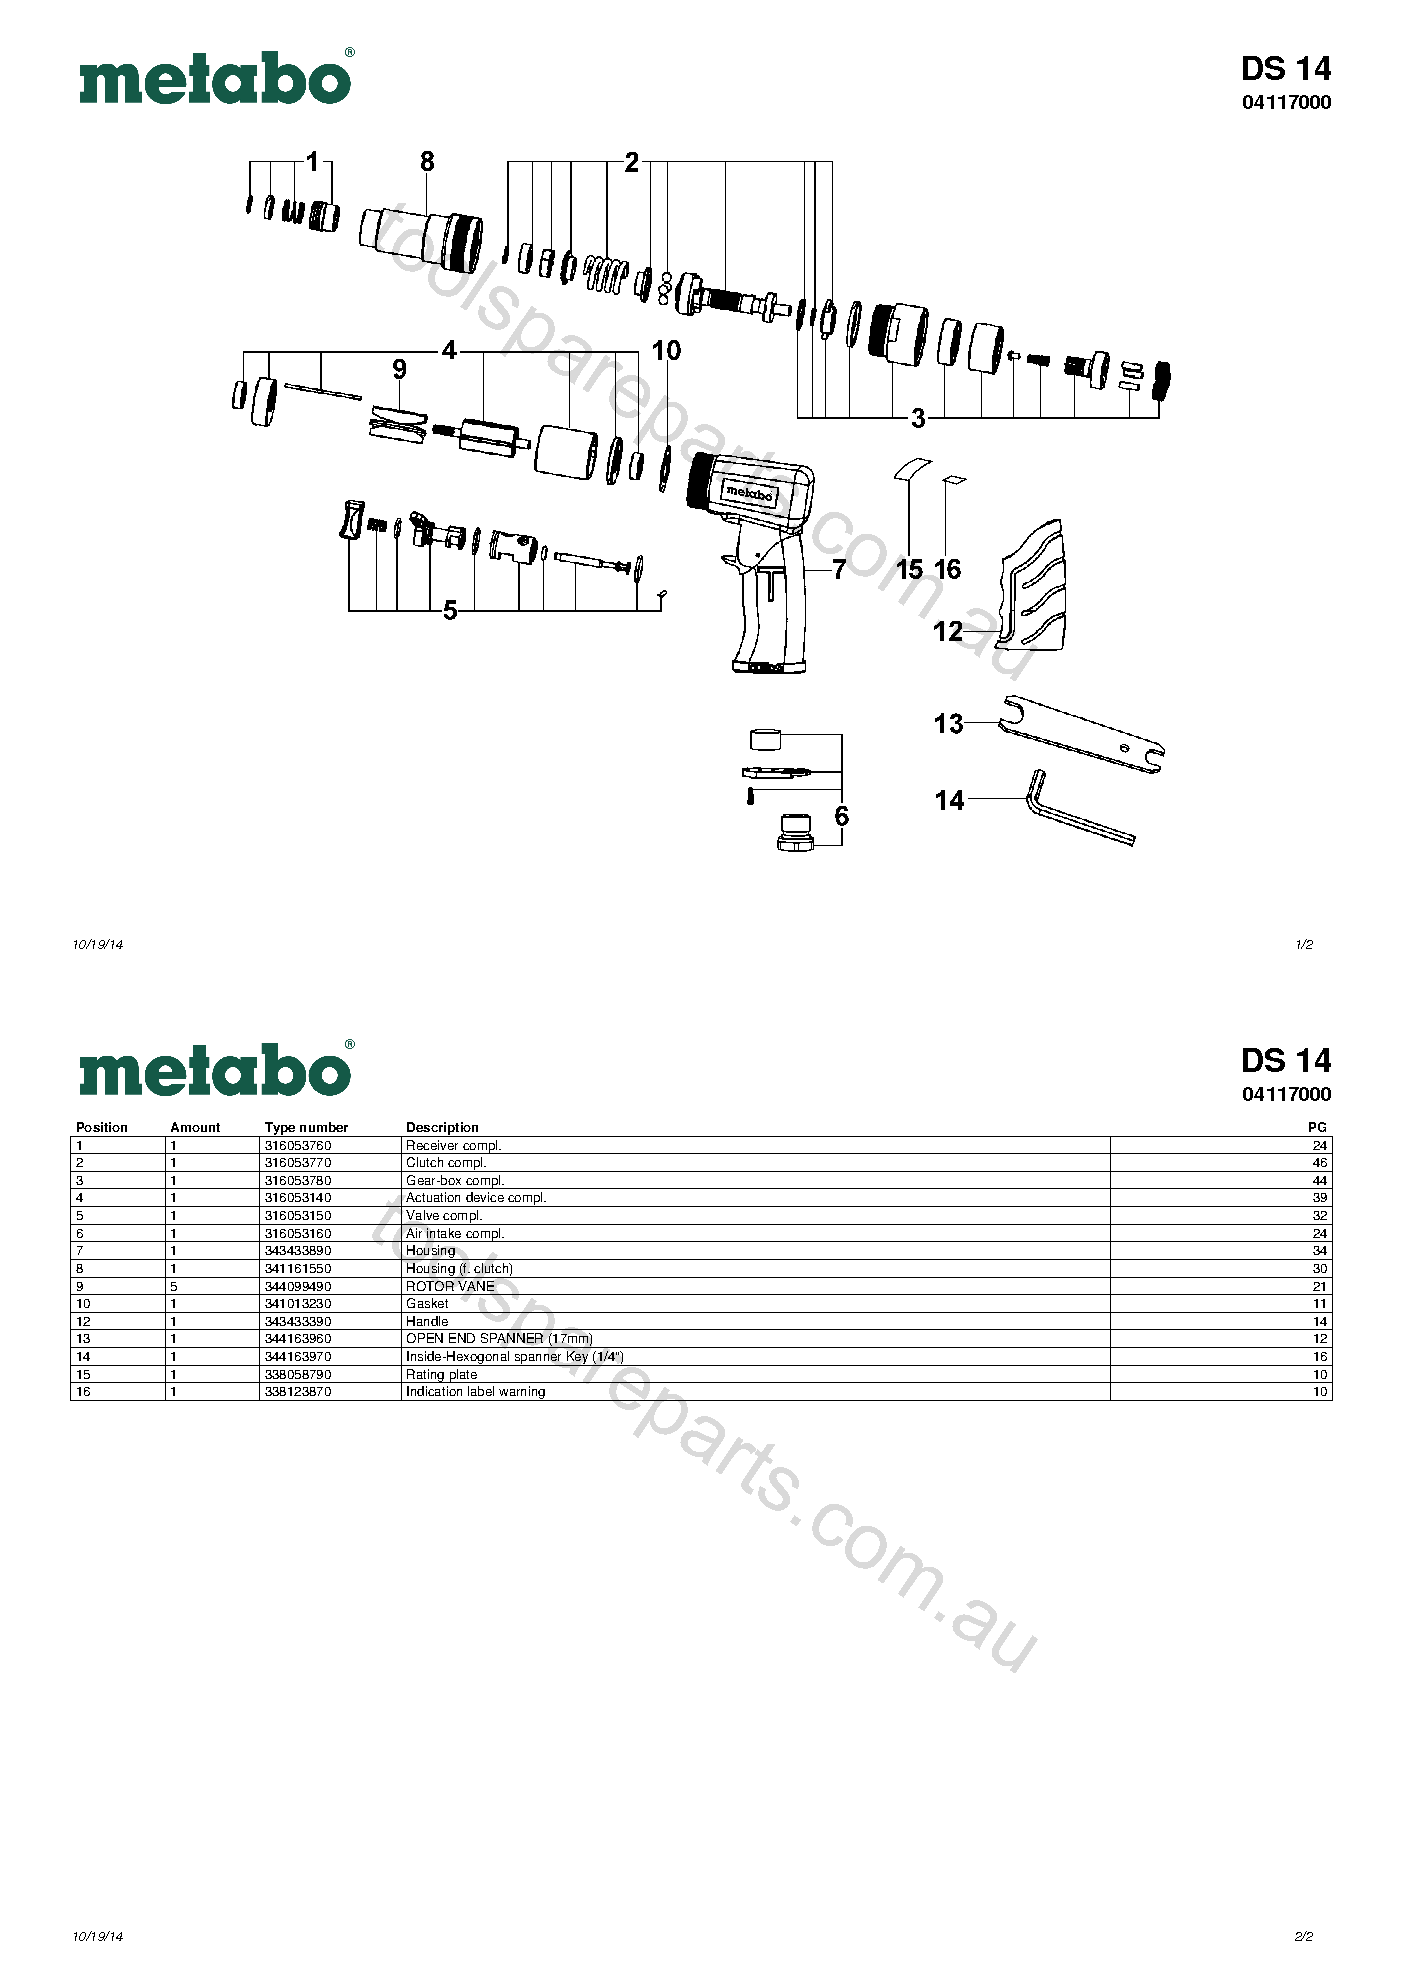 Metabo DS 14 04117000  Diagram 1